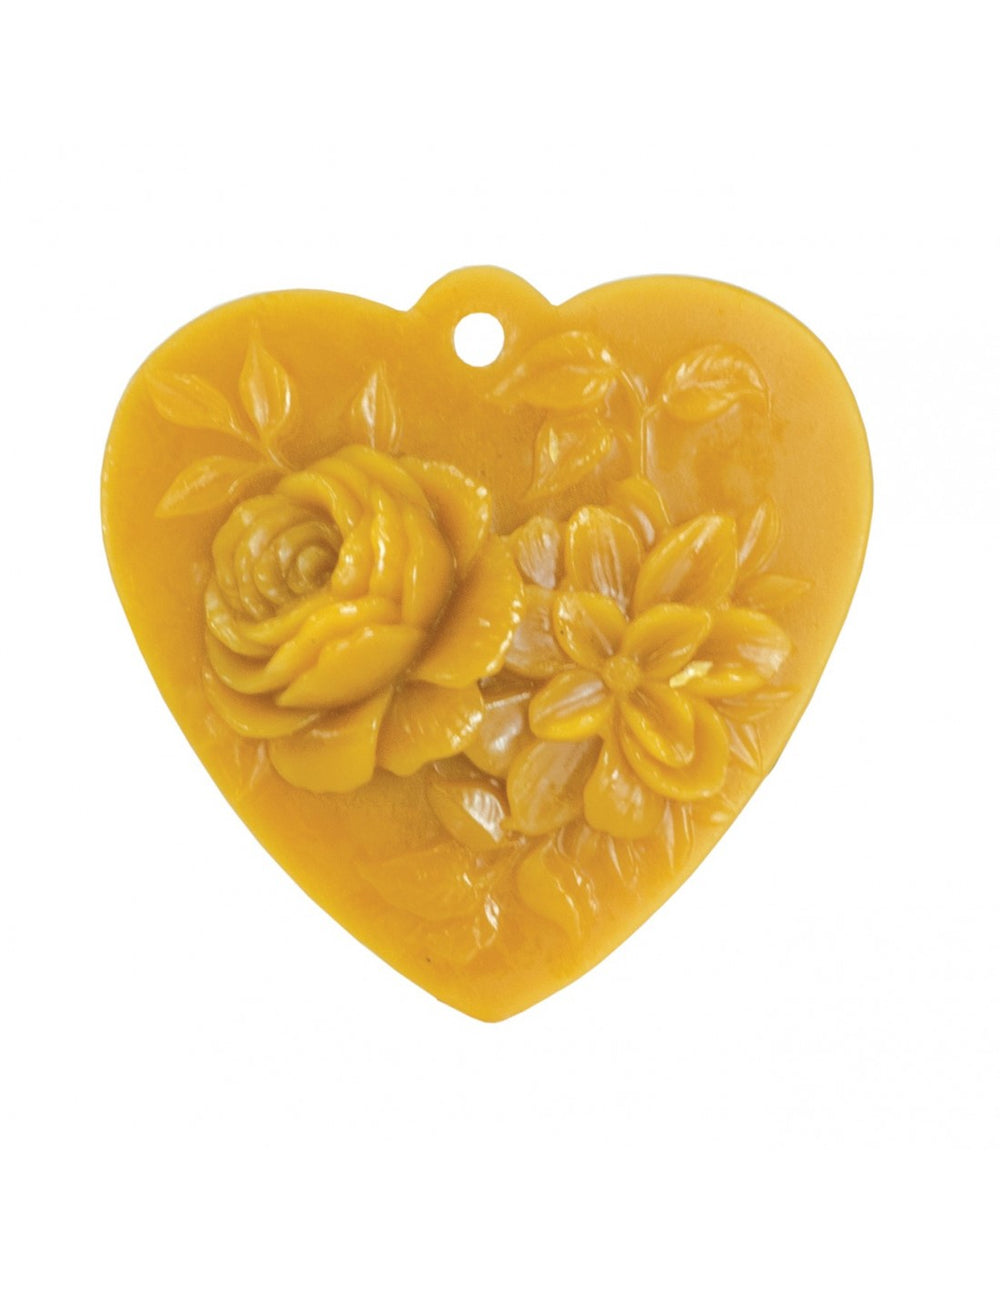 Heart With Flowers Ornament Mold